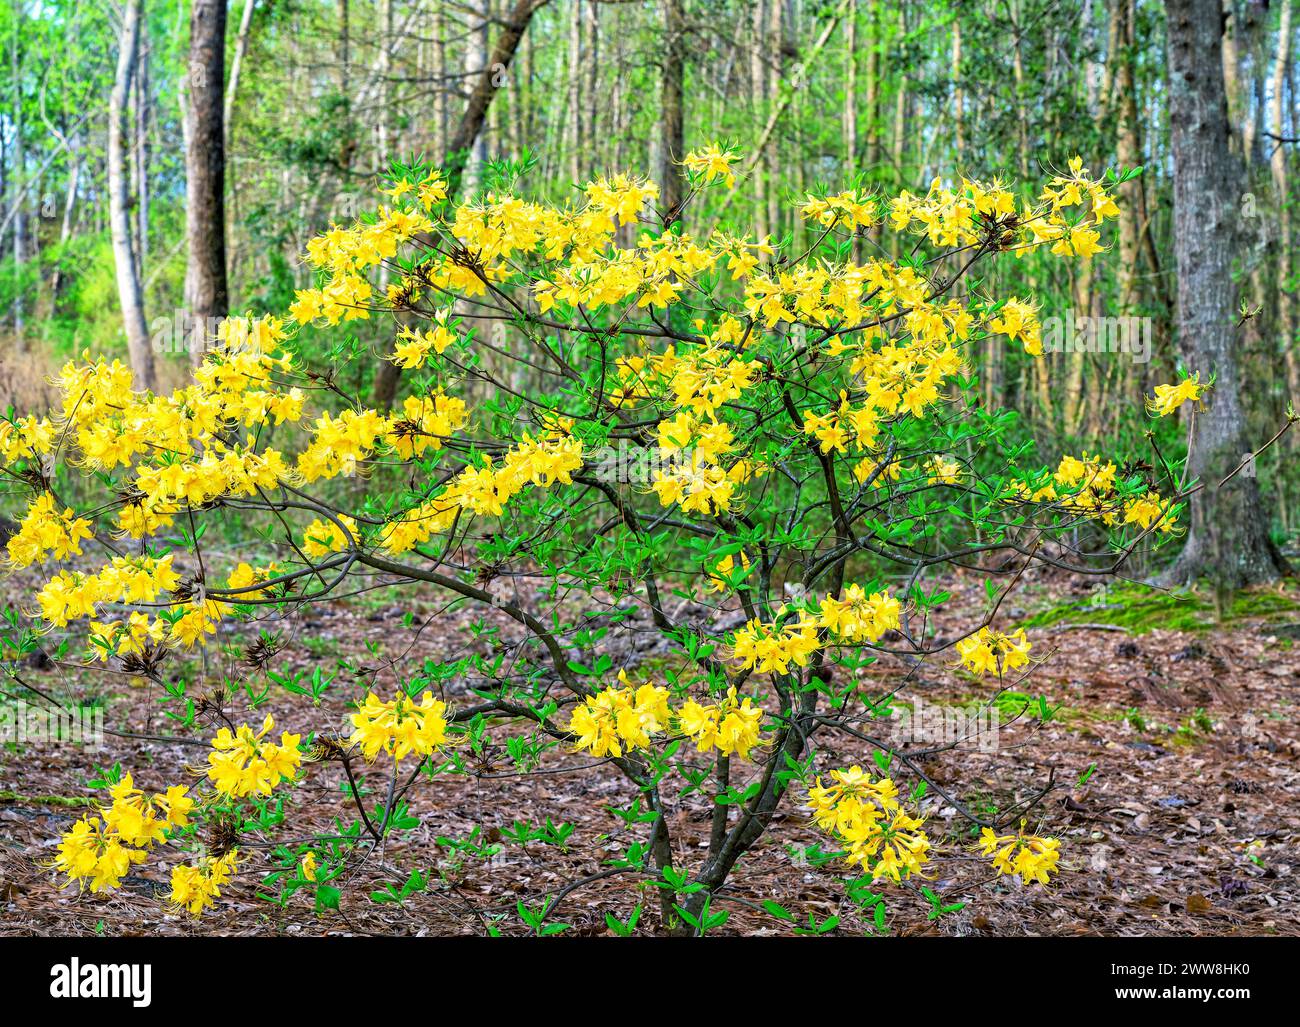 Rhododendron luteum or yellow wild azalea flowering or blooming in a home residential garden in full bloom in Alabama USA. Stock Photo